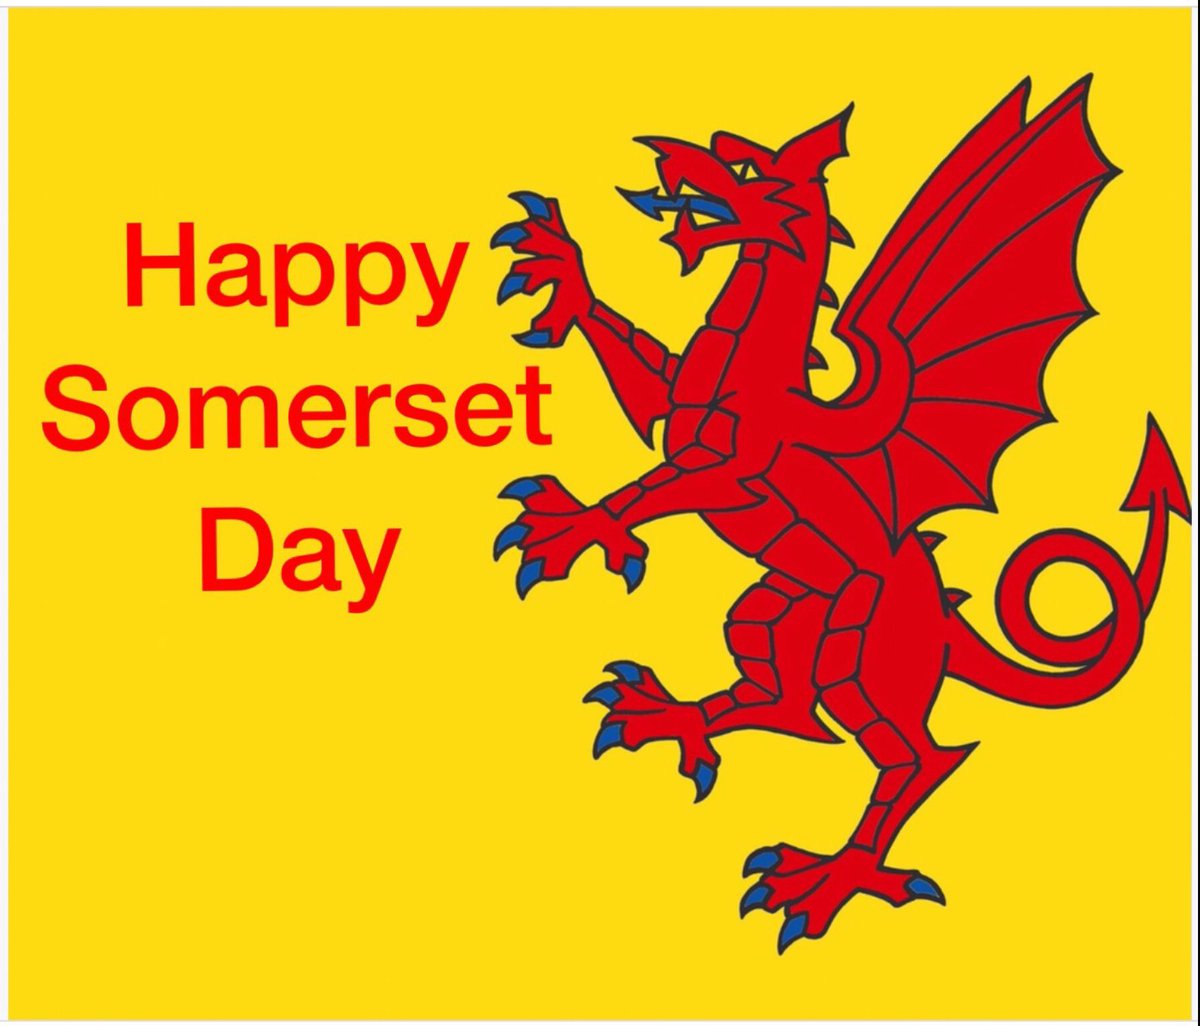 Happy Somerset Day to one and all. Enjoy everything Somerset has to give on each and every day. #SomersetDay @bbcsomerset @SomersetCCC @CountyGazette @SomersetCouncil @Giles_Adams @SomersetMuseum